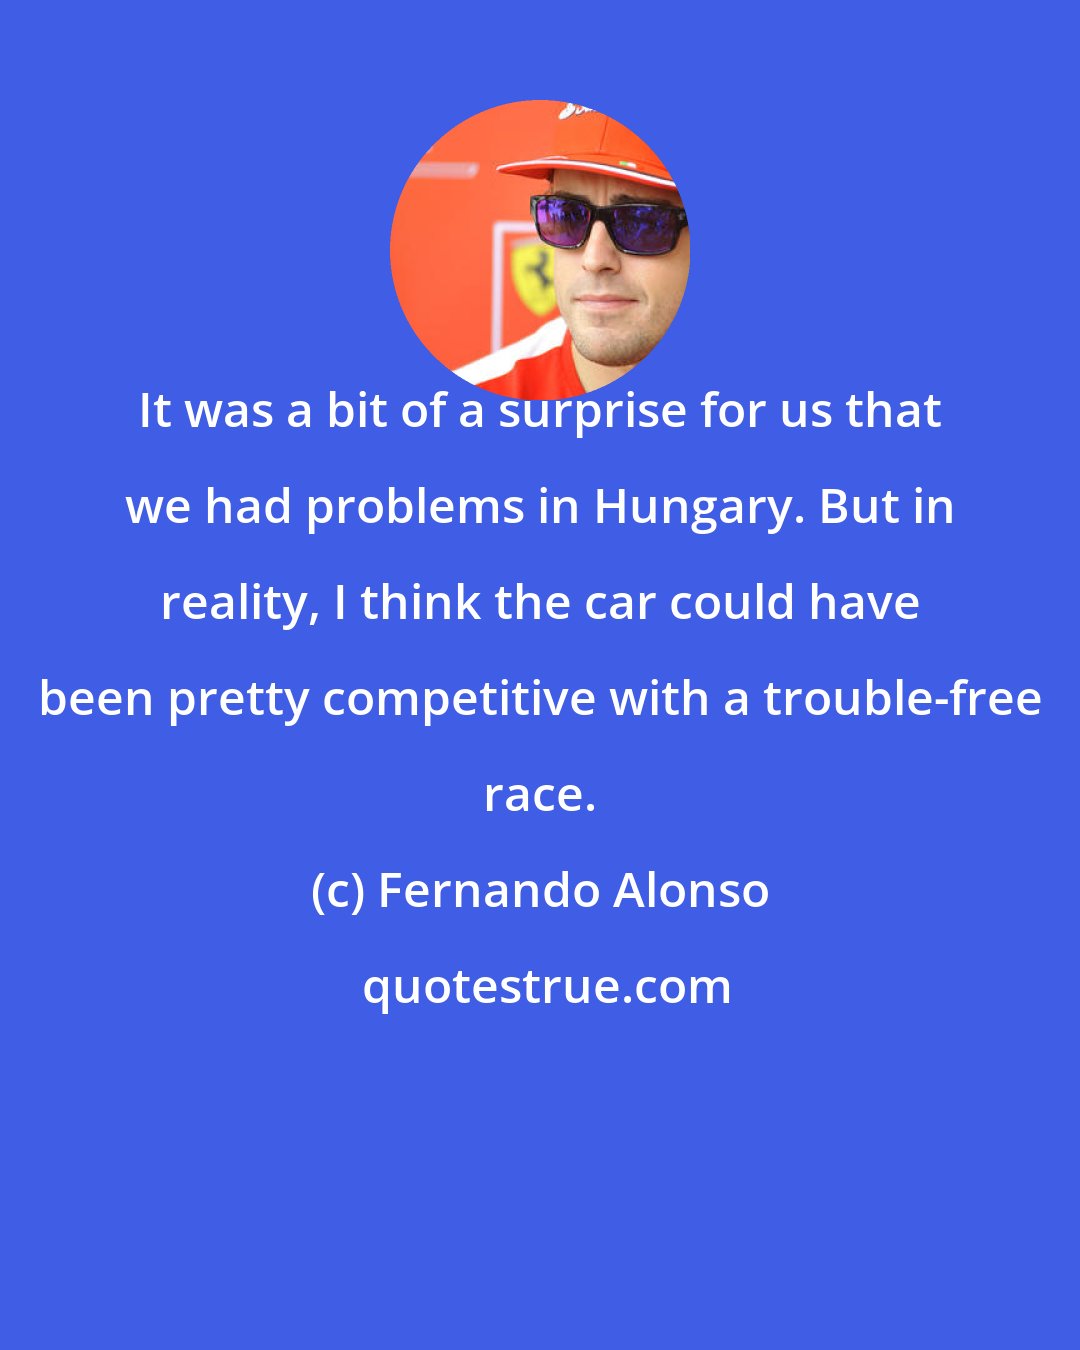 Fernando Alonso: It was a bit of a surprise for us that we had problems in Hungary. But in reality, I think the car could have been pretty competitive with a trouble-free race.